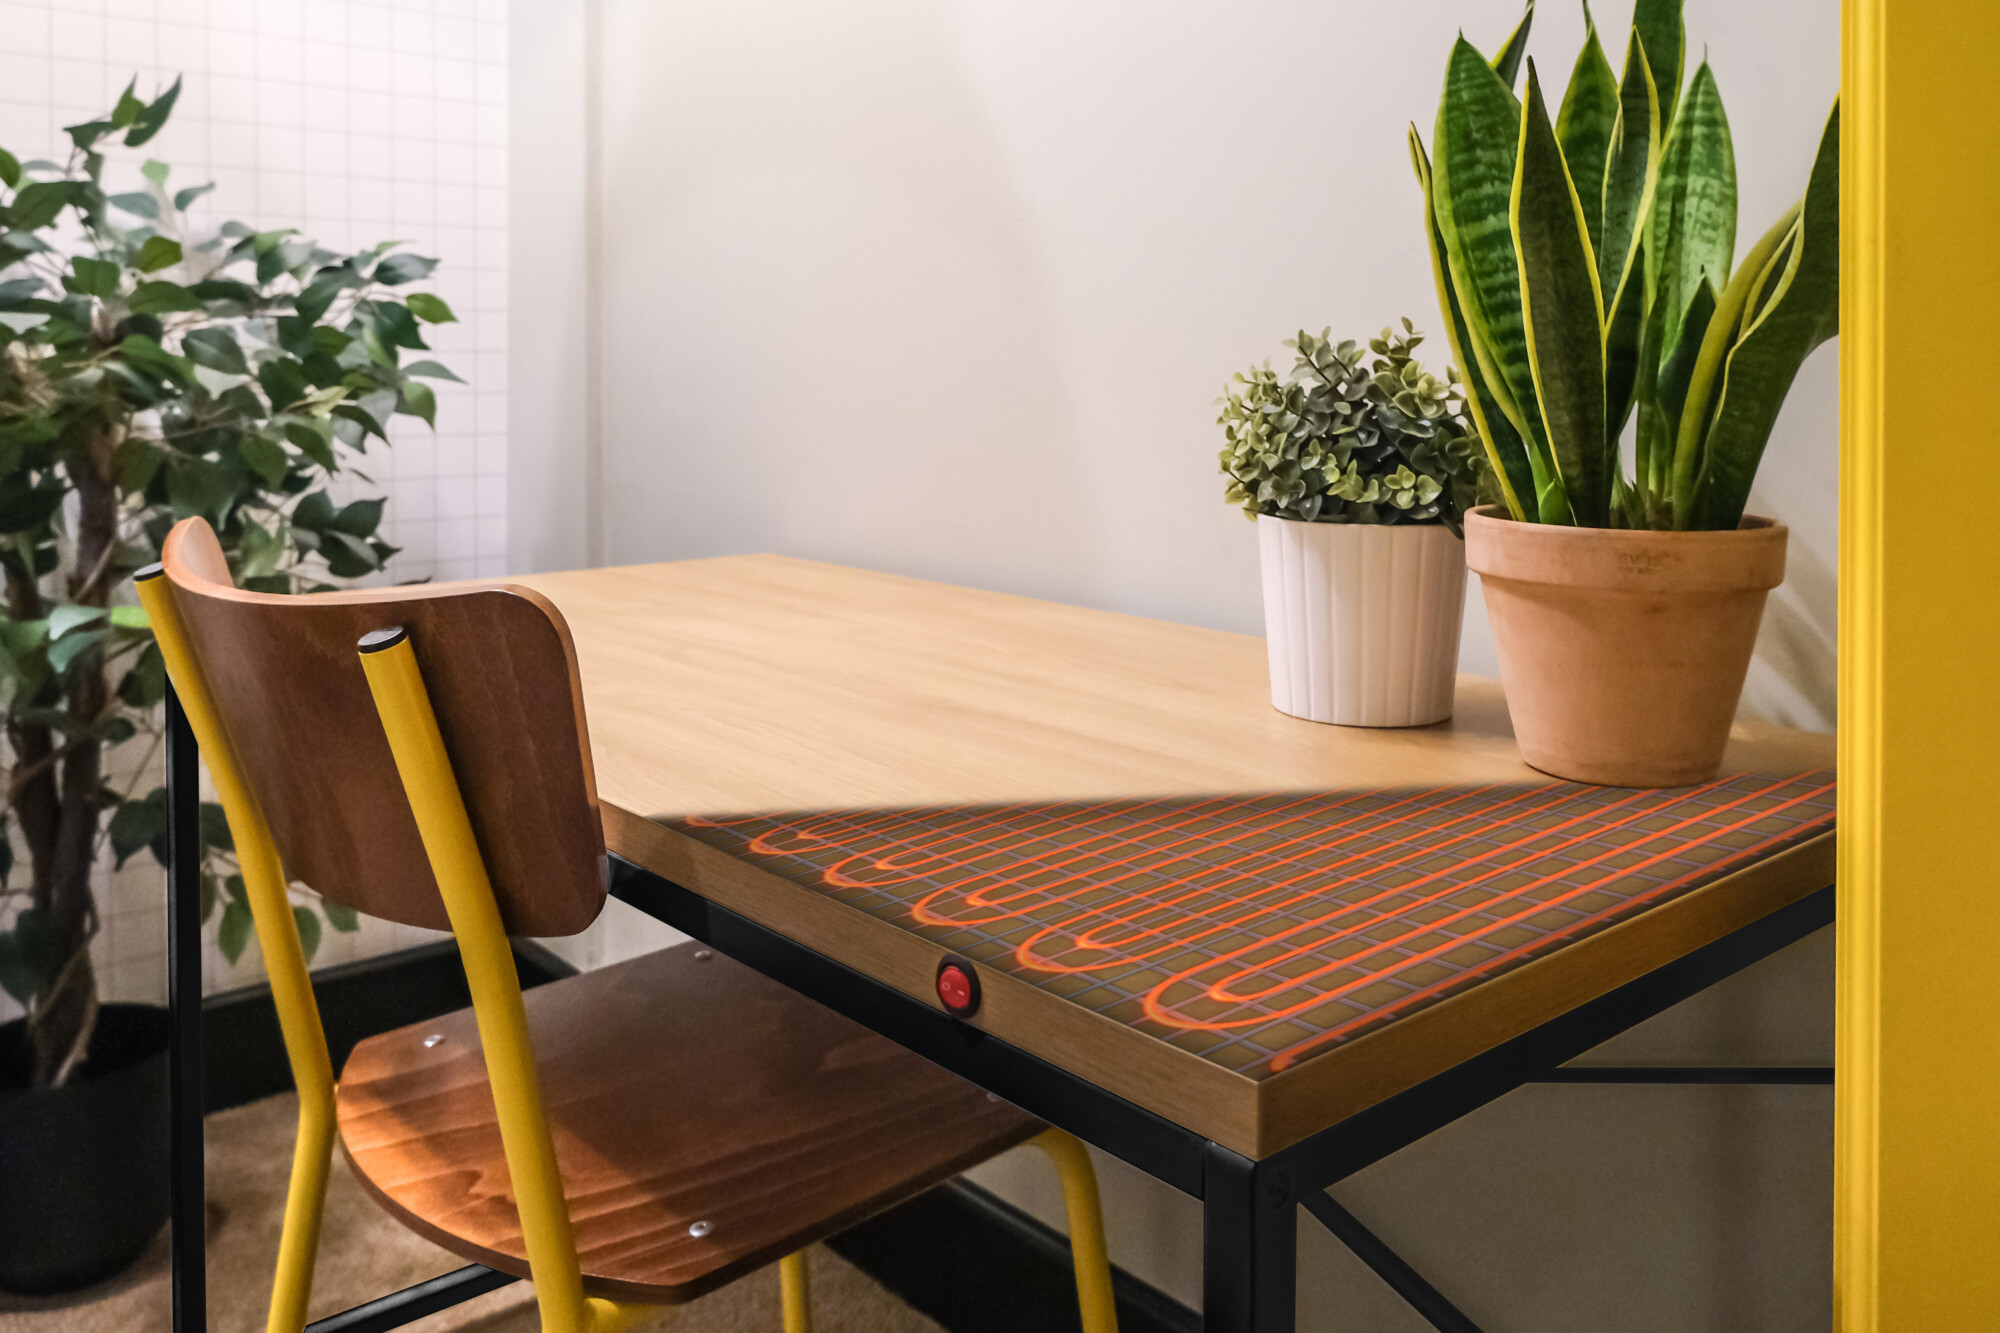 The ökoform Miniöko-up Heated Height Adjustable Desk, as seen on Dragon’s Den, will keep you warm throughout your working day with the integrated electric heater. 